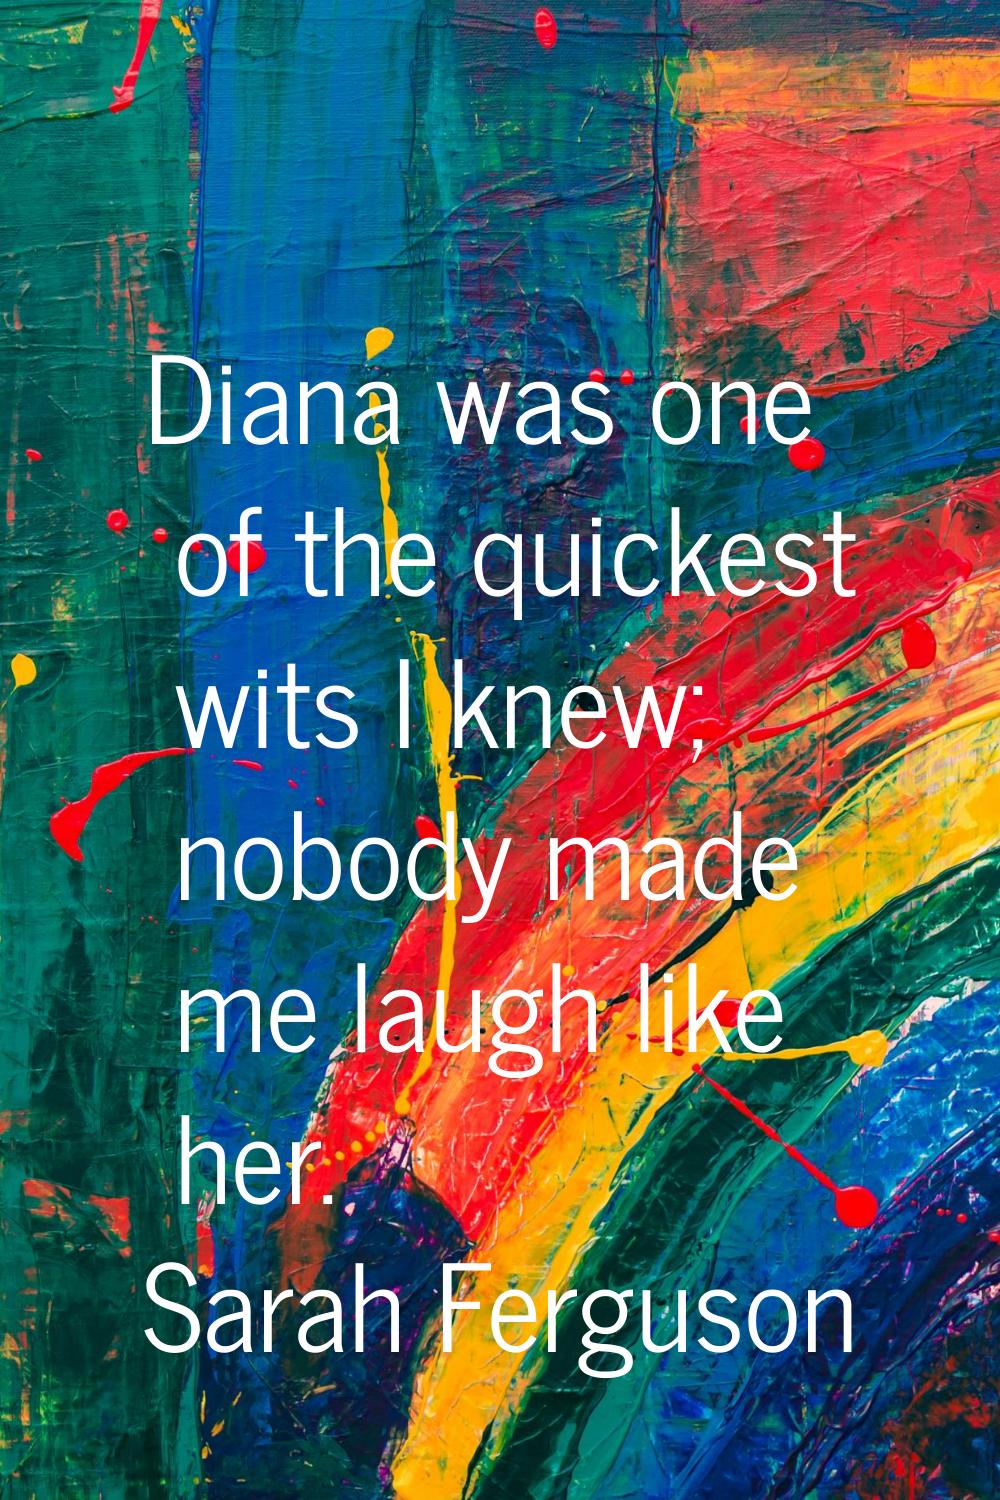 Diana was one of the quickest wits I knew; nobody made me laugh like her.